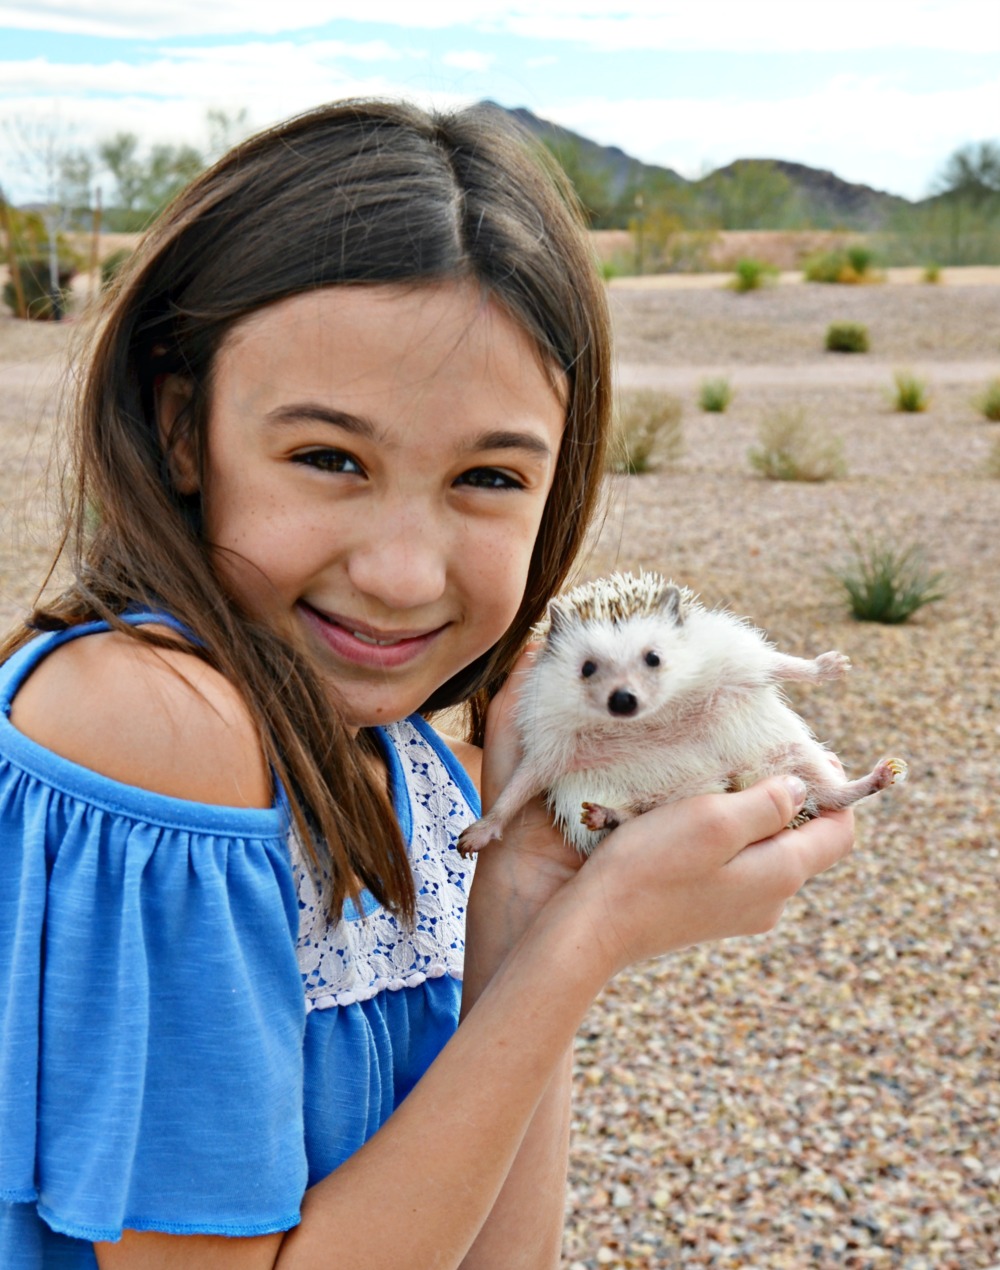 Find out if hedgehogs make good pets for kids!